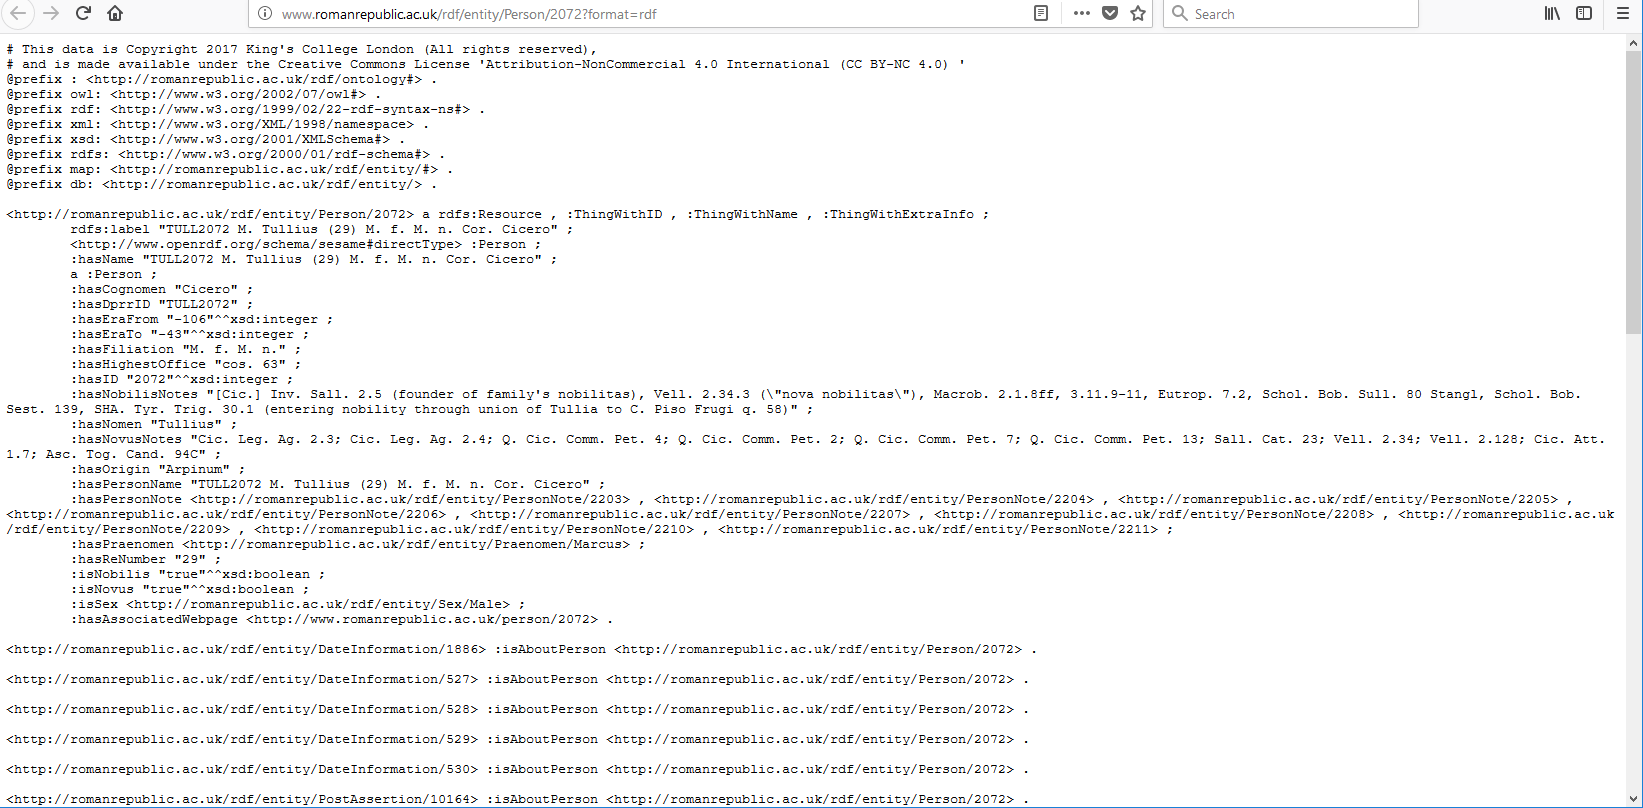 A screen capture of the RDF data (Turtle format) delivered by the server for Cicero's URI.